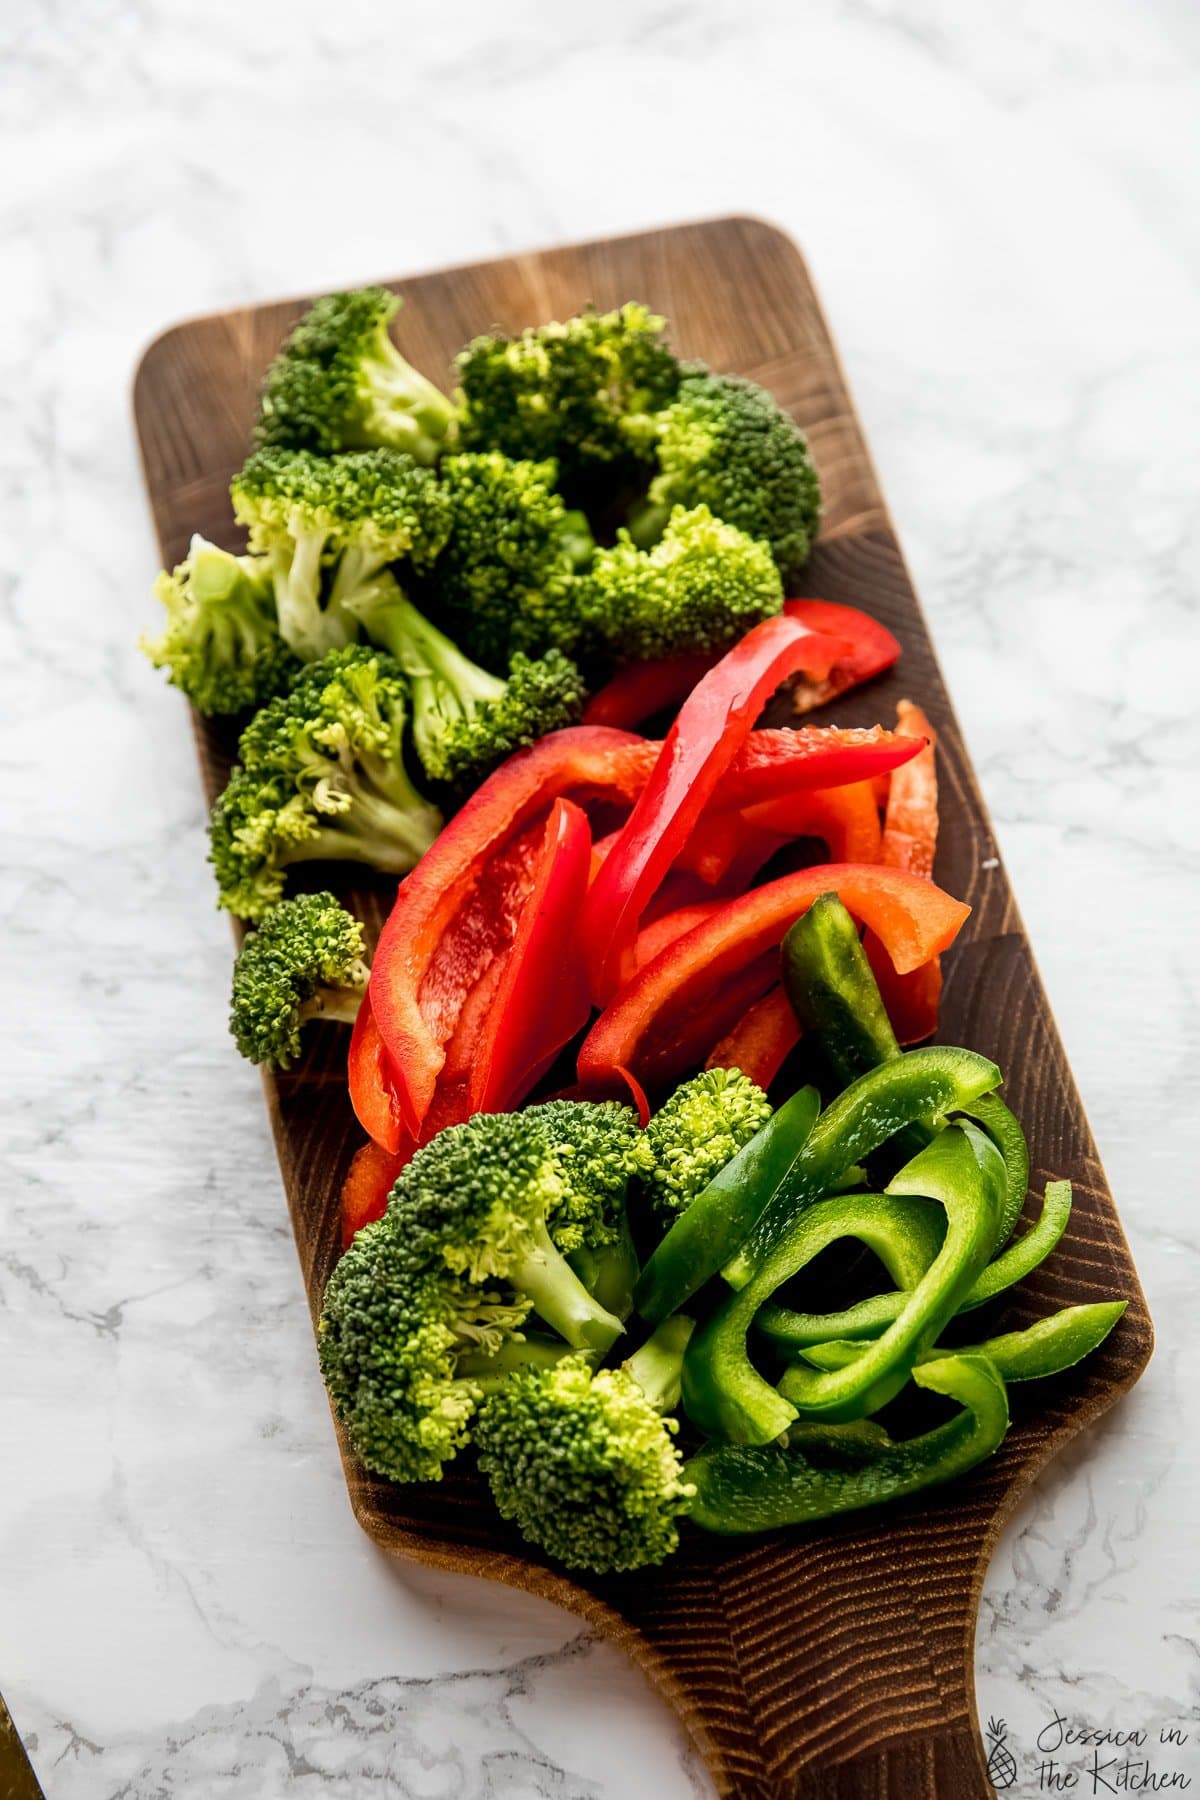 Chopped broccoli and bell peppers on a cutting board.